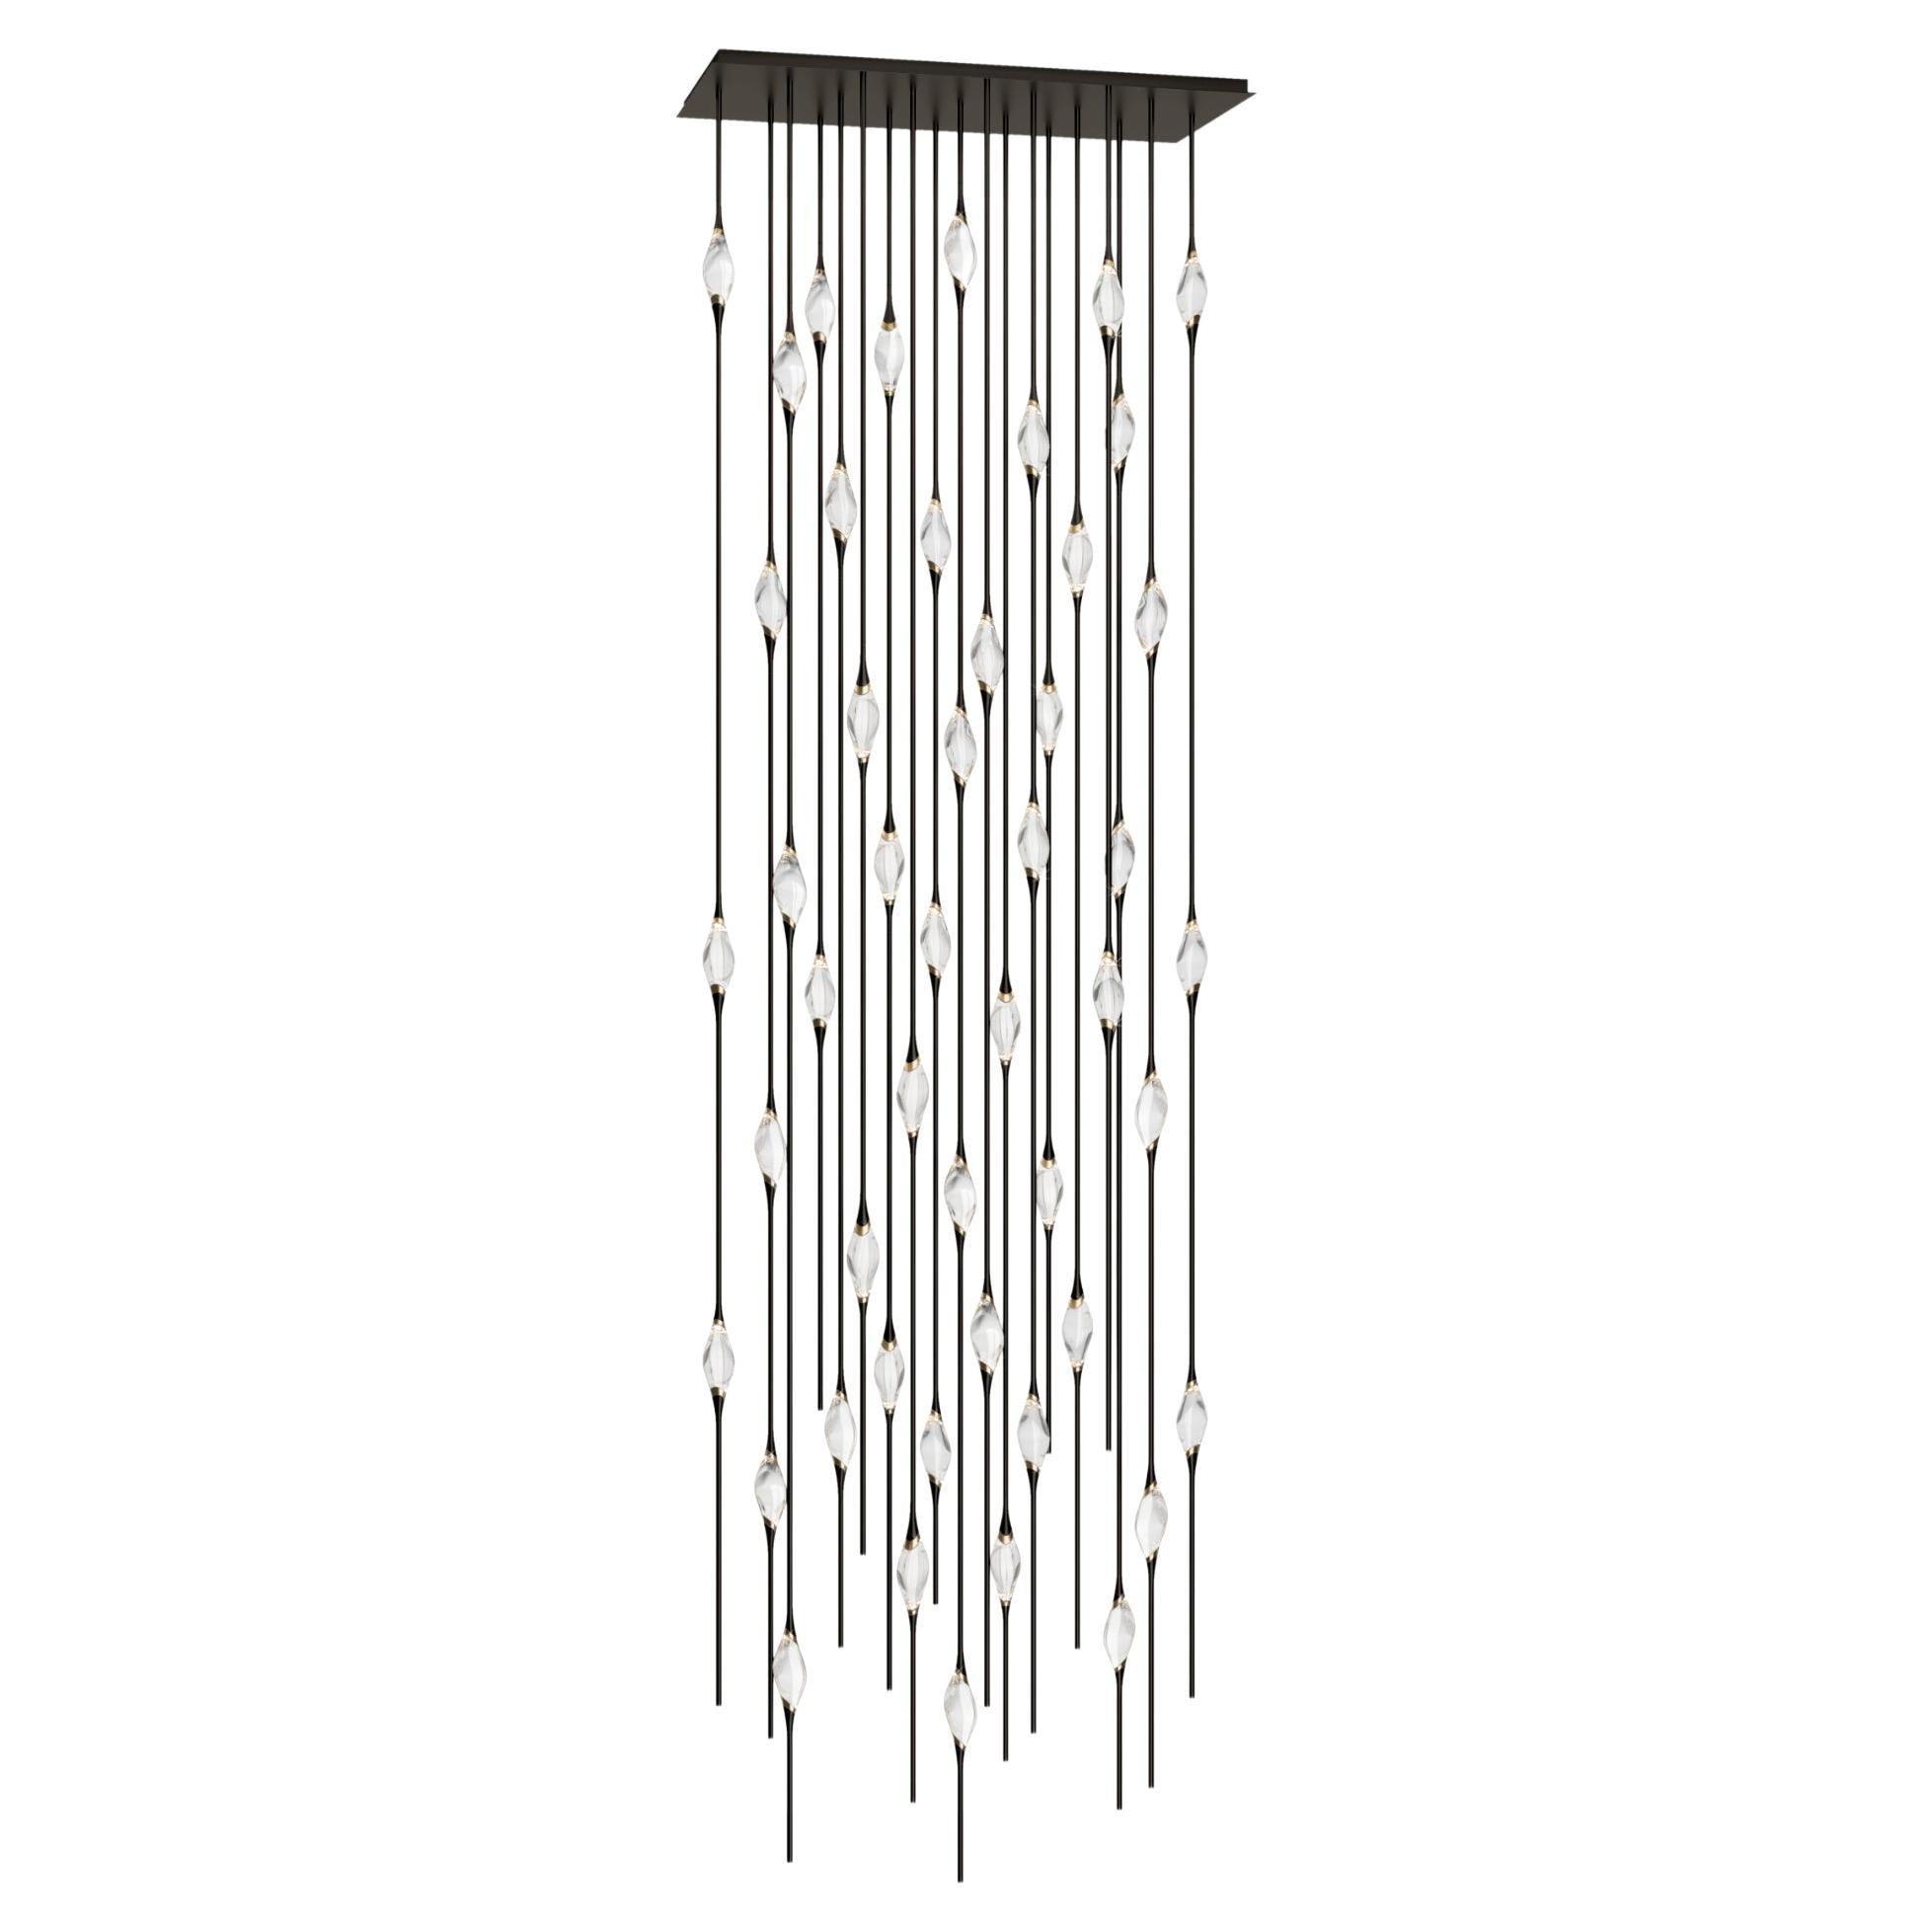 "Il Pezzo 12 Cluster Chandelier" - height 500cm/197" - black and polished brass